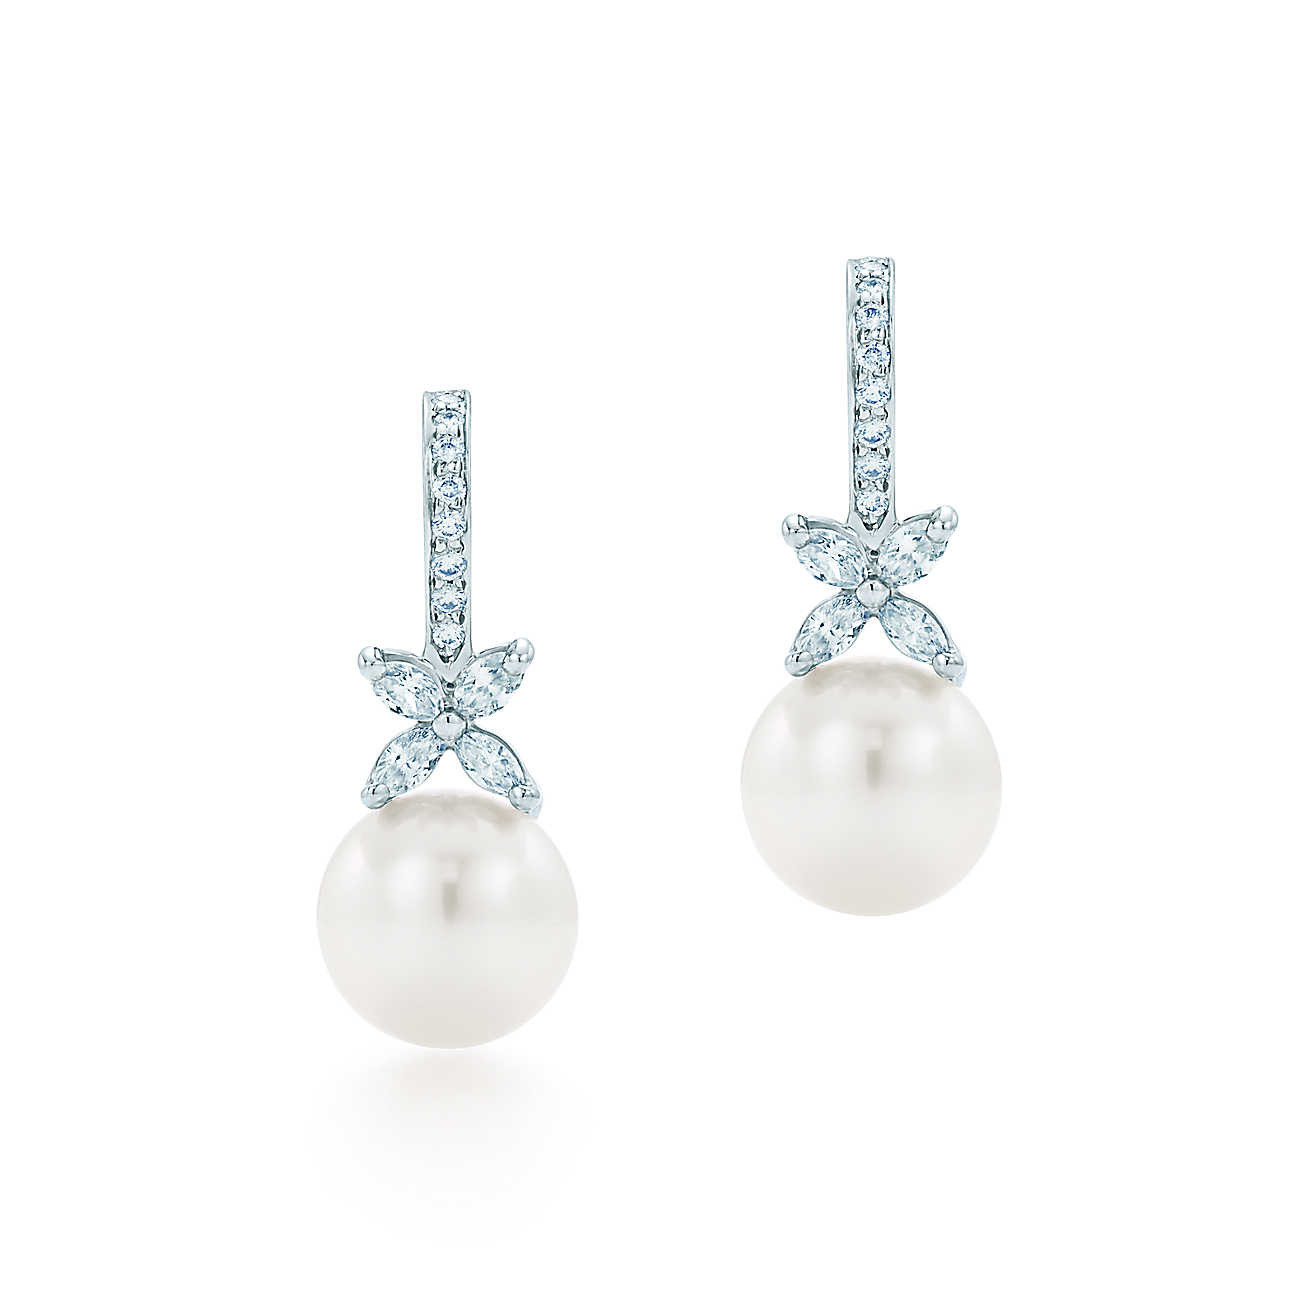 Tiffany Pearl Earrings
 Tiffany Victoria™ earrings in platinum with South Sea